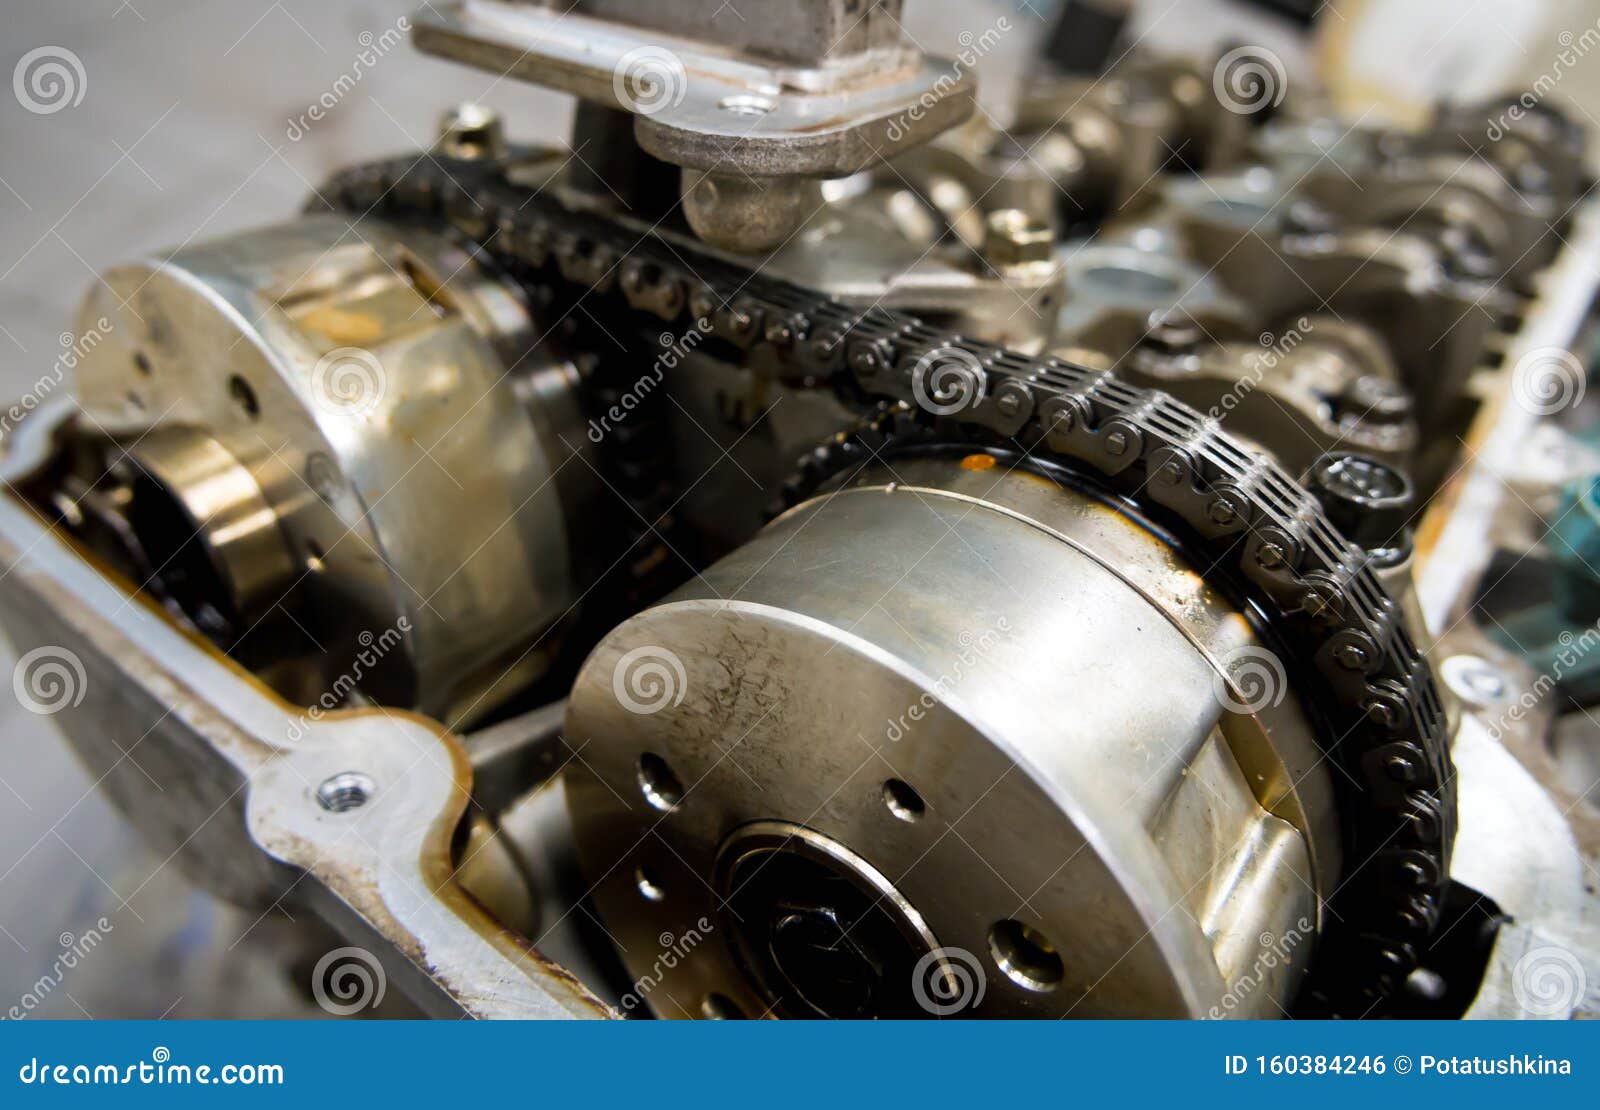 timing chain drive in a car engine